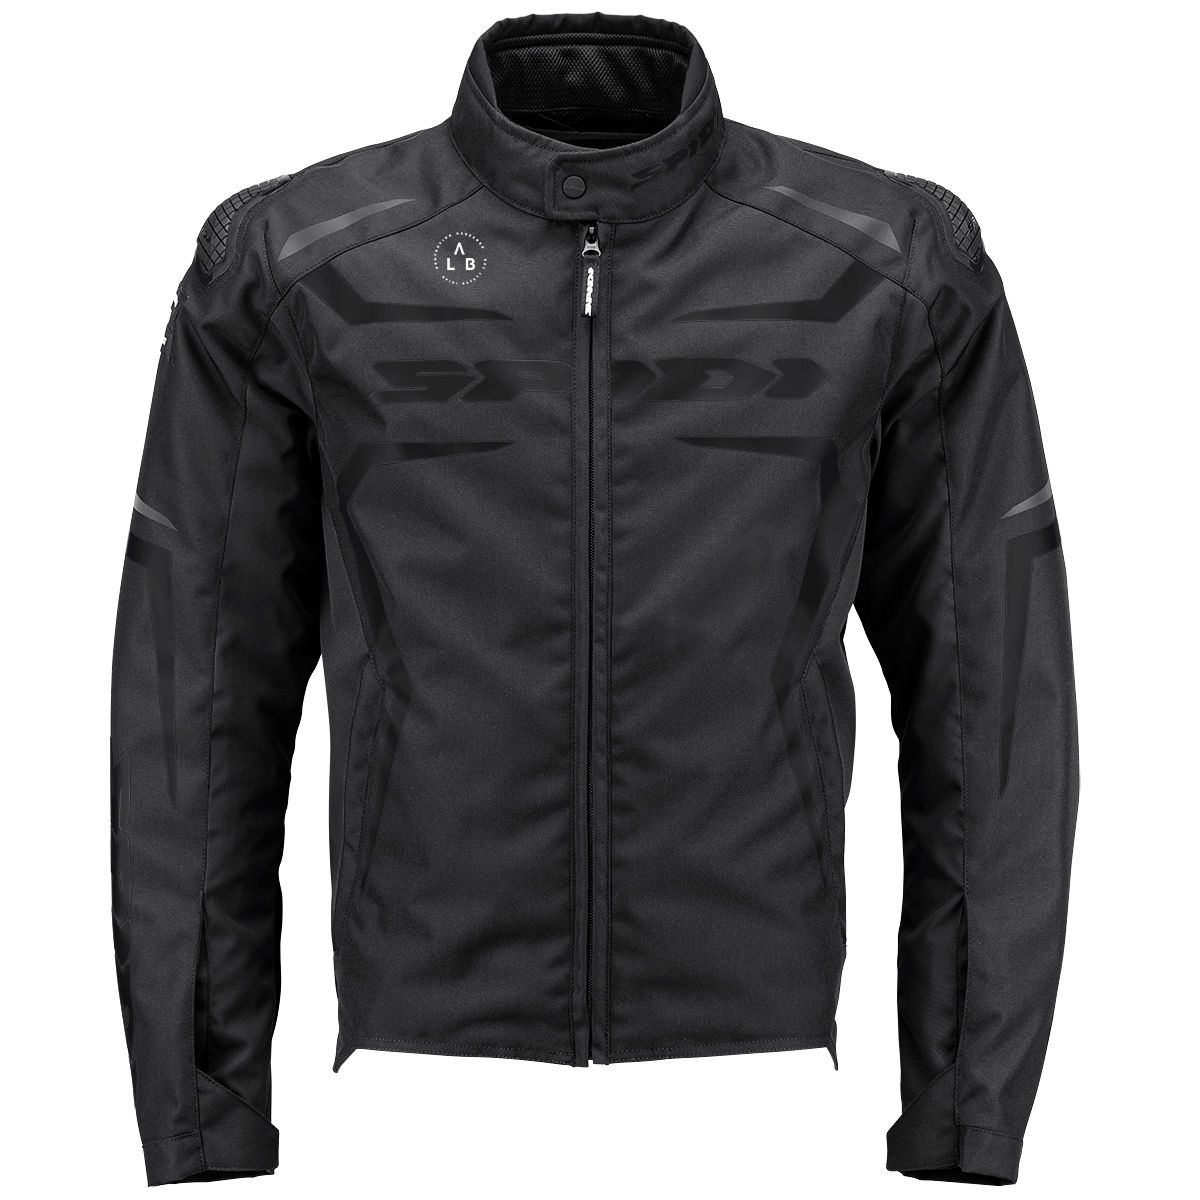 Image of Spidi Race-Evo H2Out Jacket Black Size S ID 8030161460353